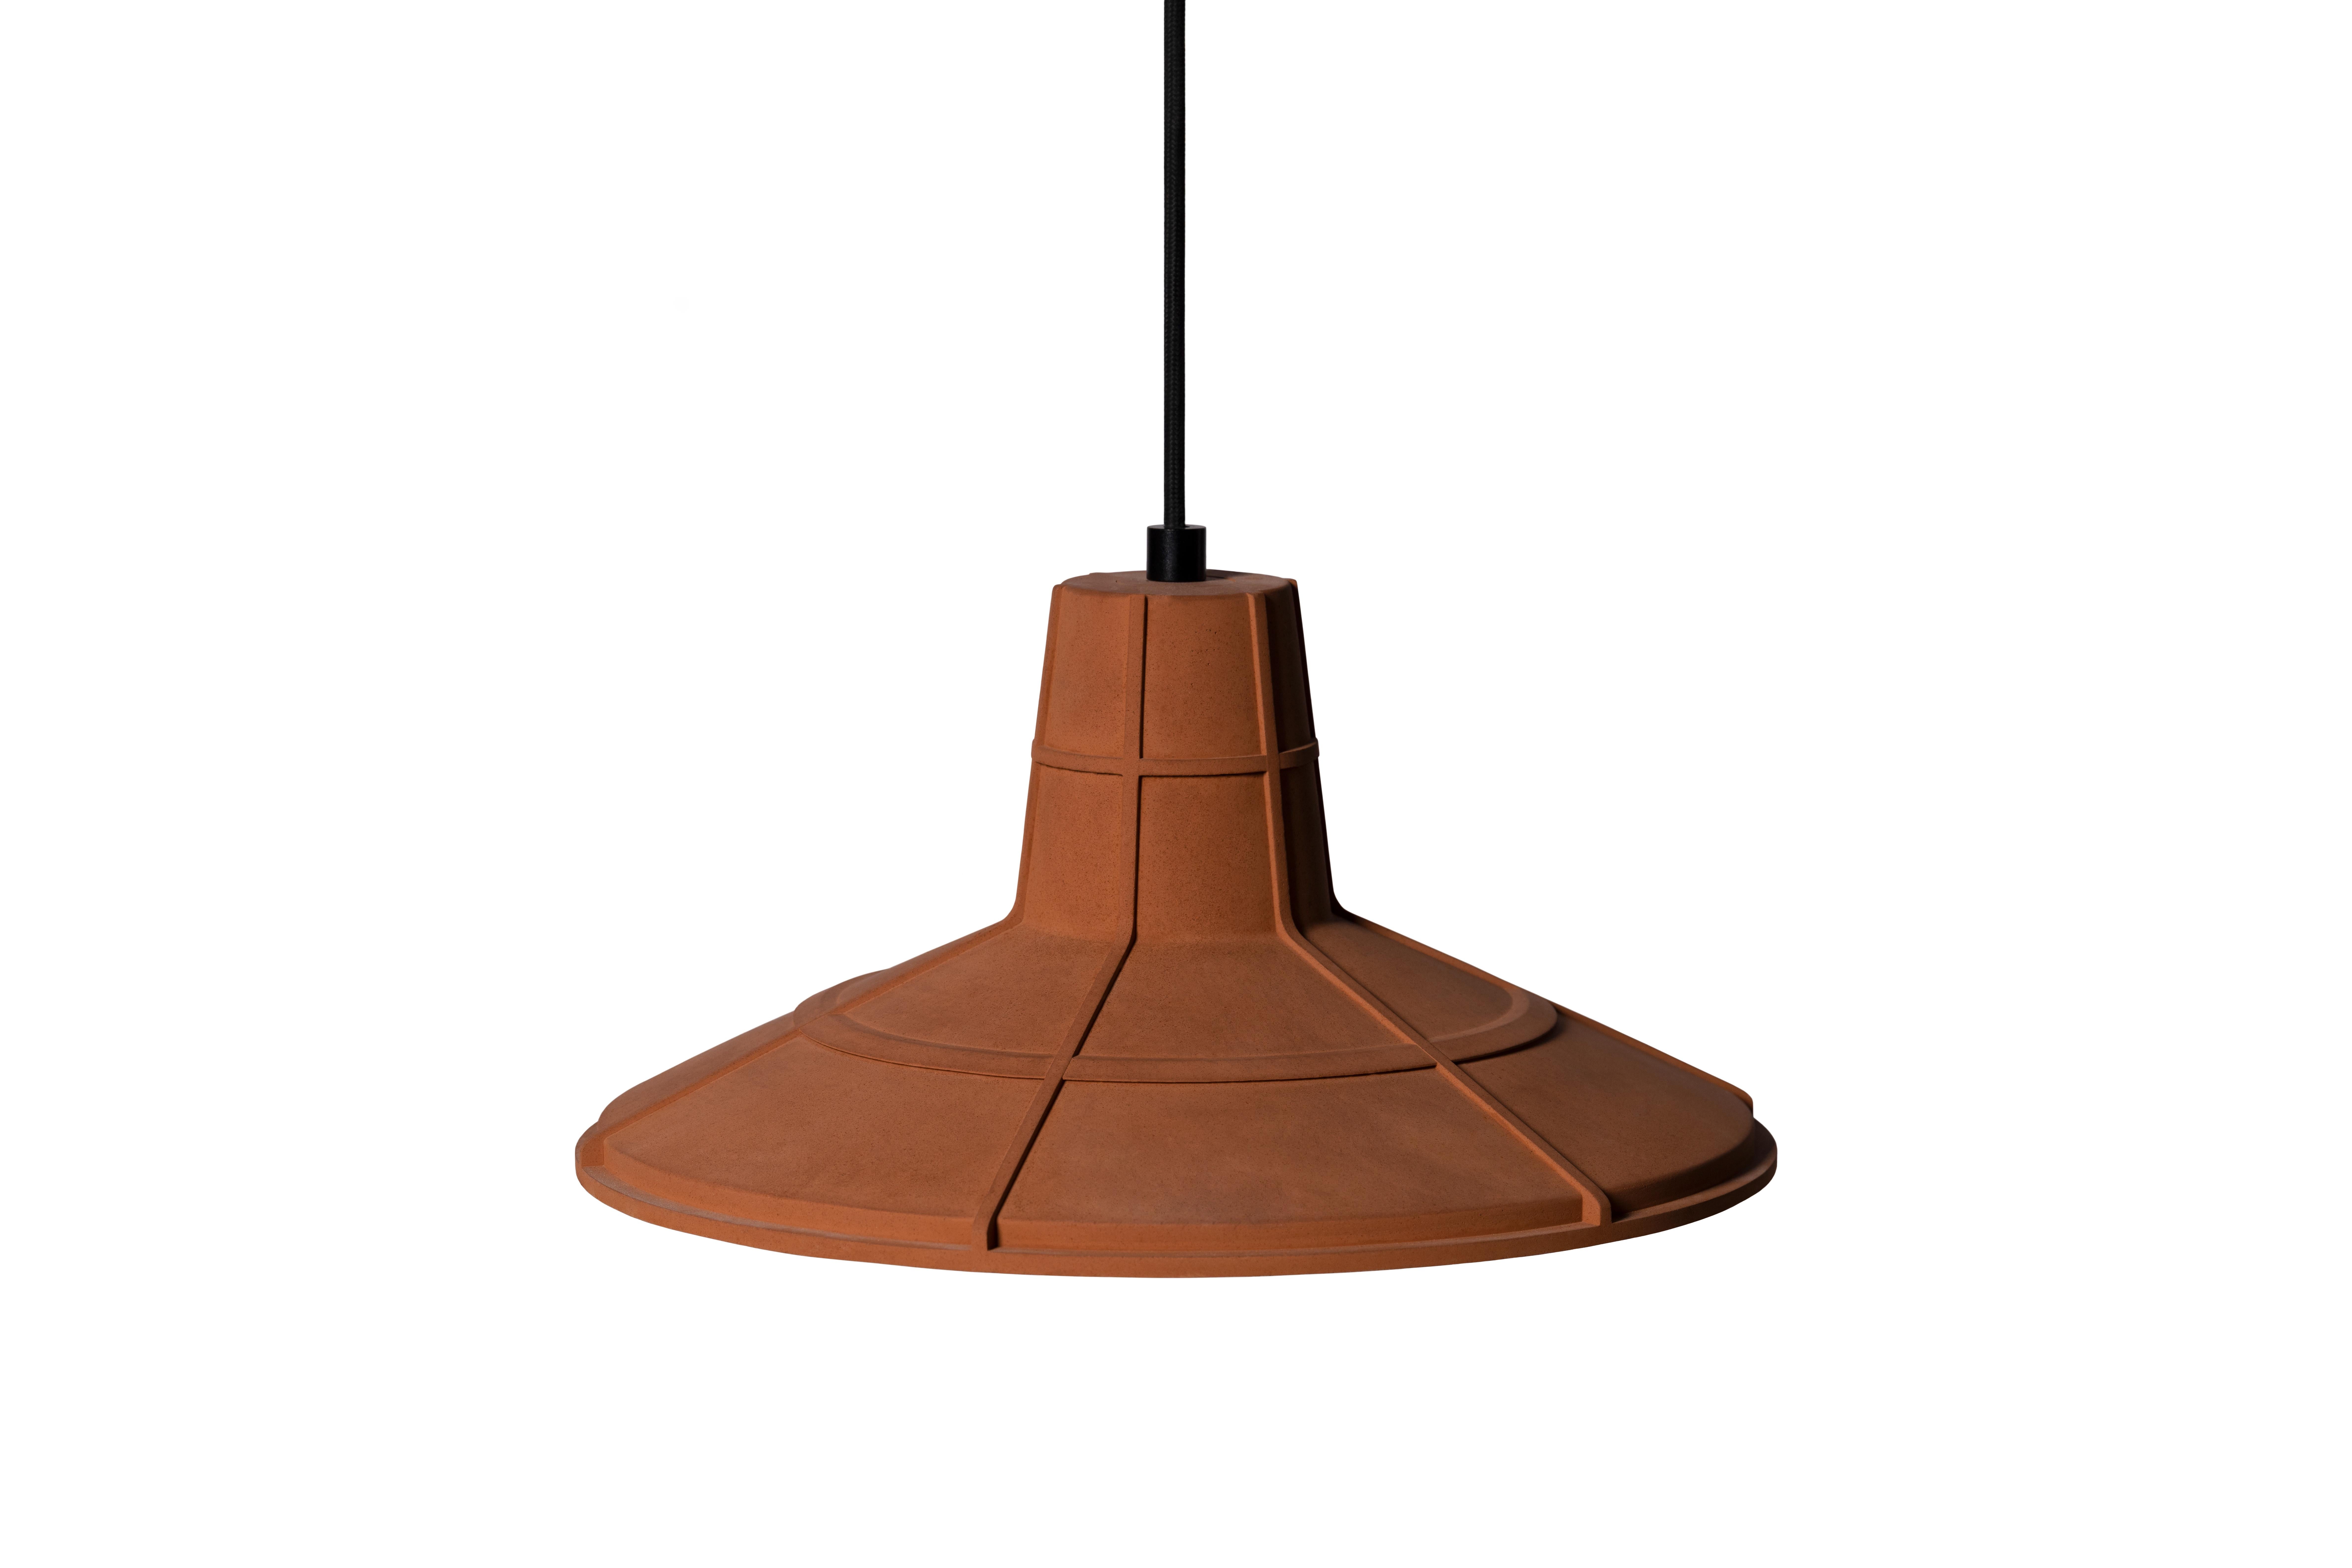 Pendant lamp 'L' by Nongzao x Bentu design.
Material: Terracotta 
Color: Earthy orange

Measures: 17.5 cm high, 36.5 cm diameter
Wire: 3 meters (black)
Lamp type: AC 100-240V 50-60Hz  9W - Comptable with US electric system.

Variations:
- Color: